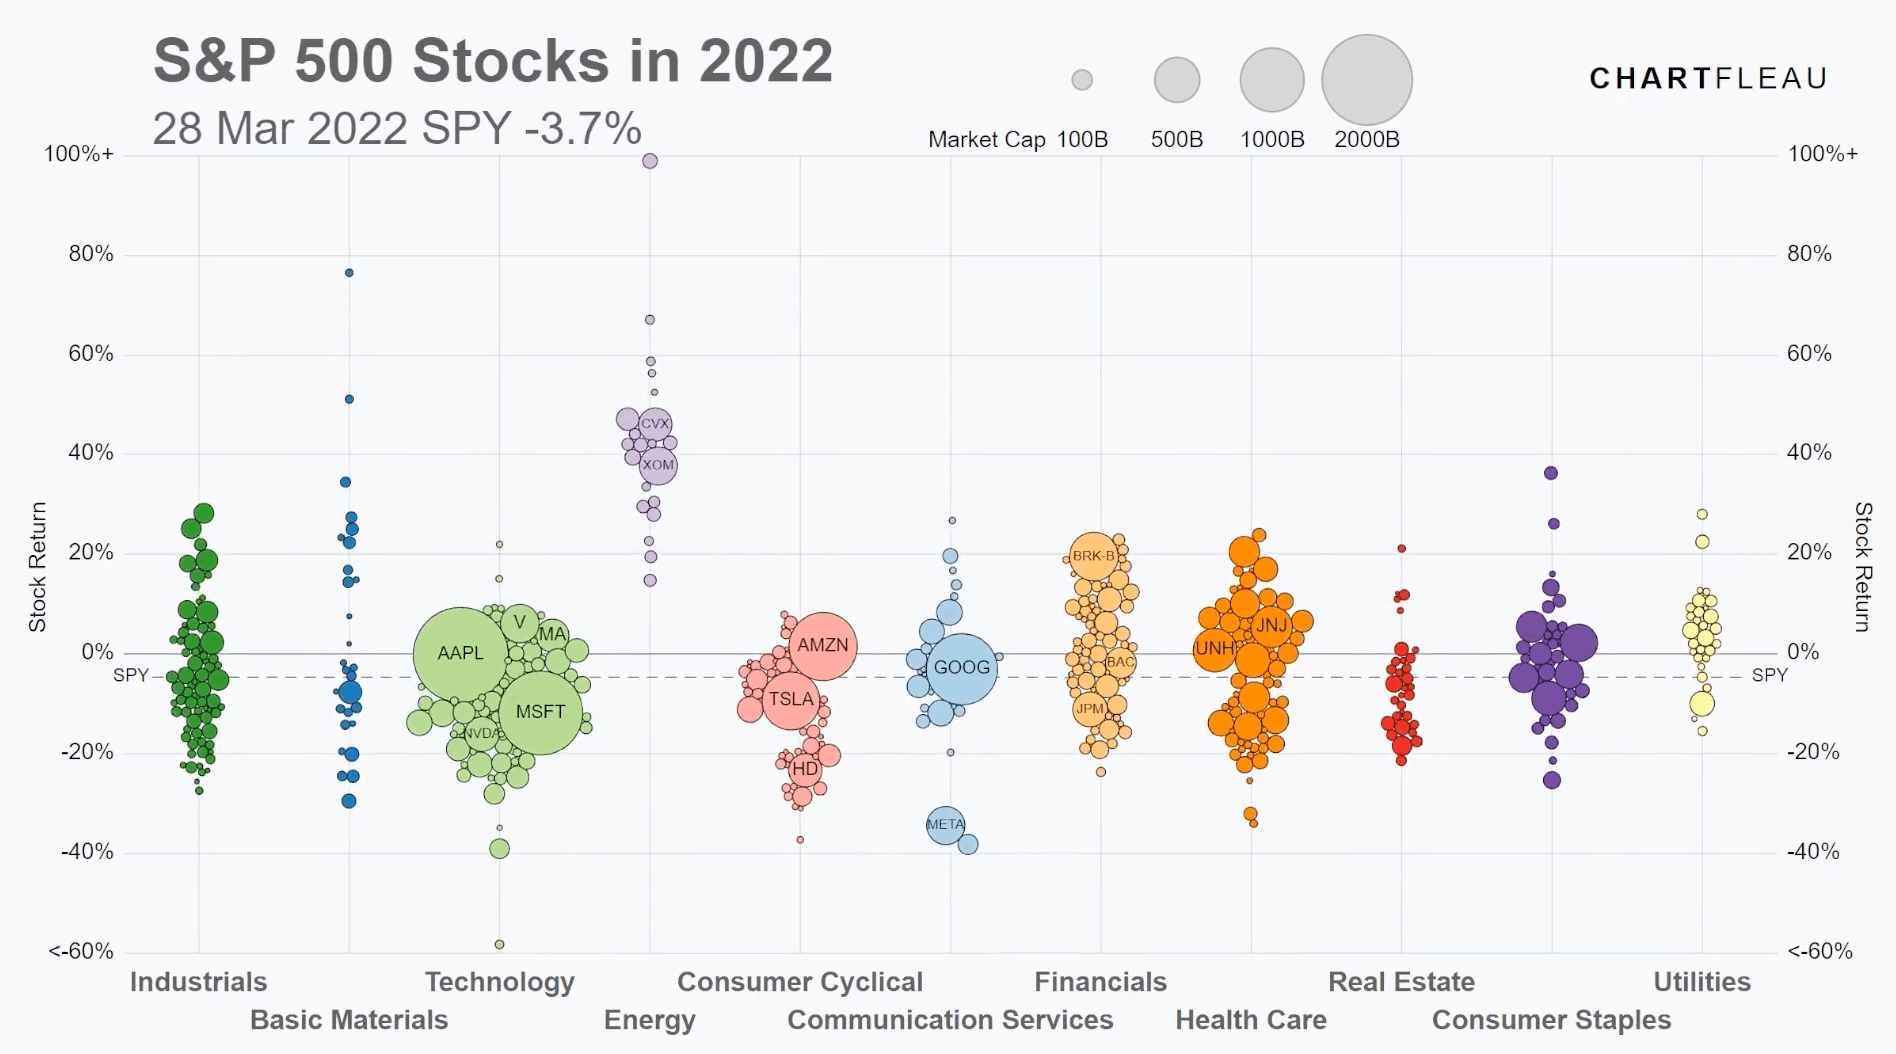 S&P 500 Performance in 2022, by Sector (Video)